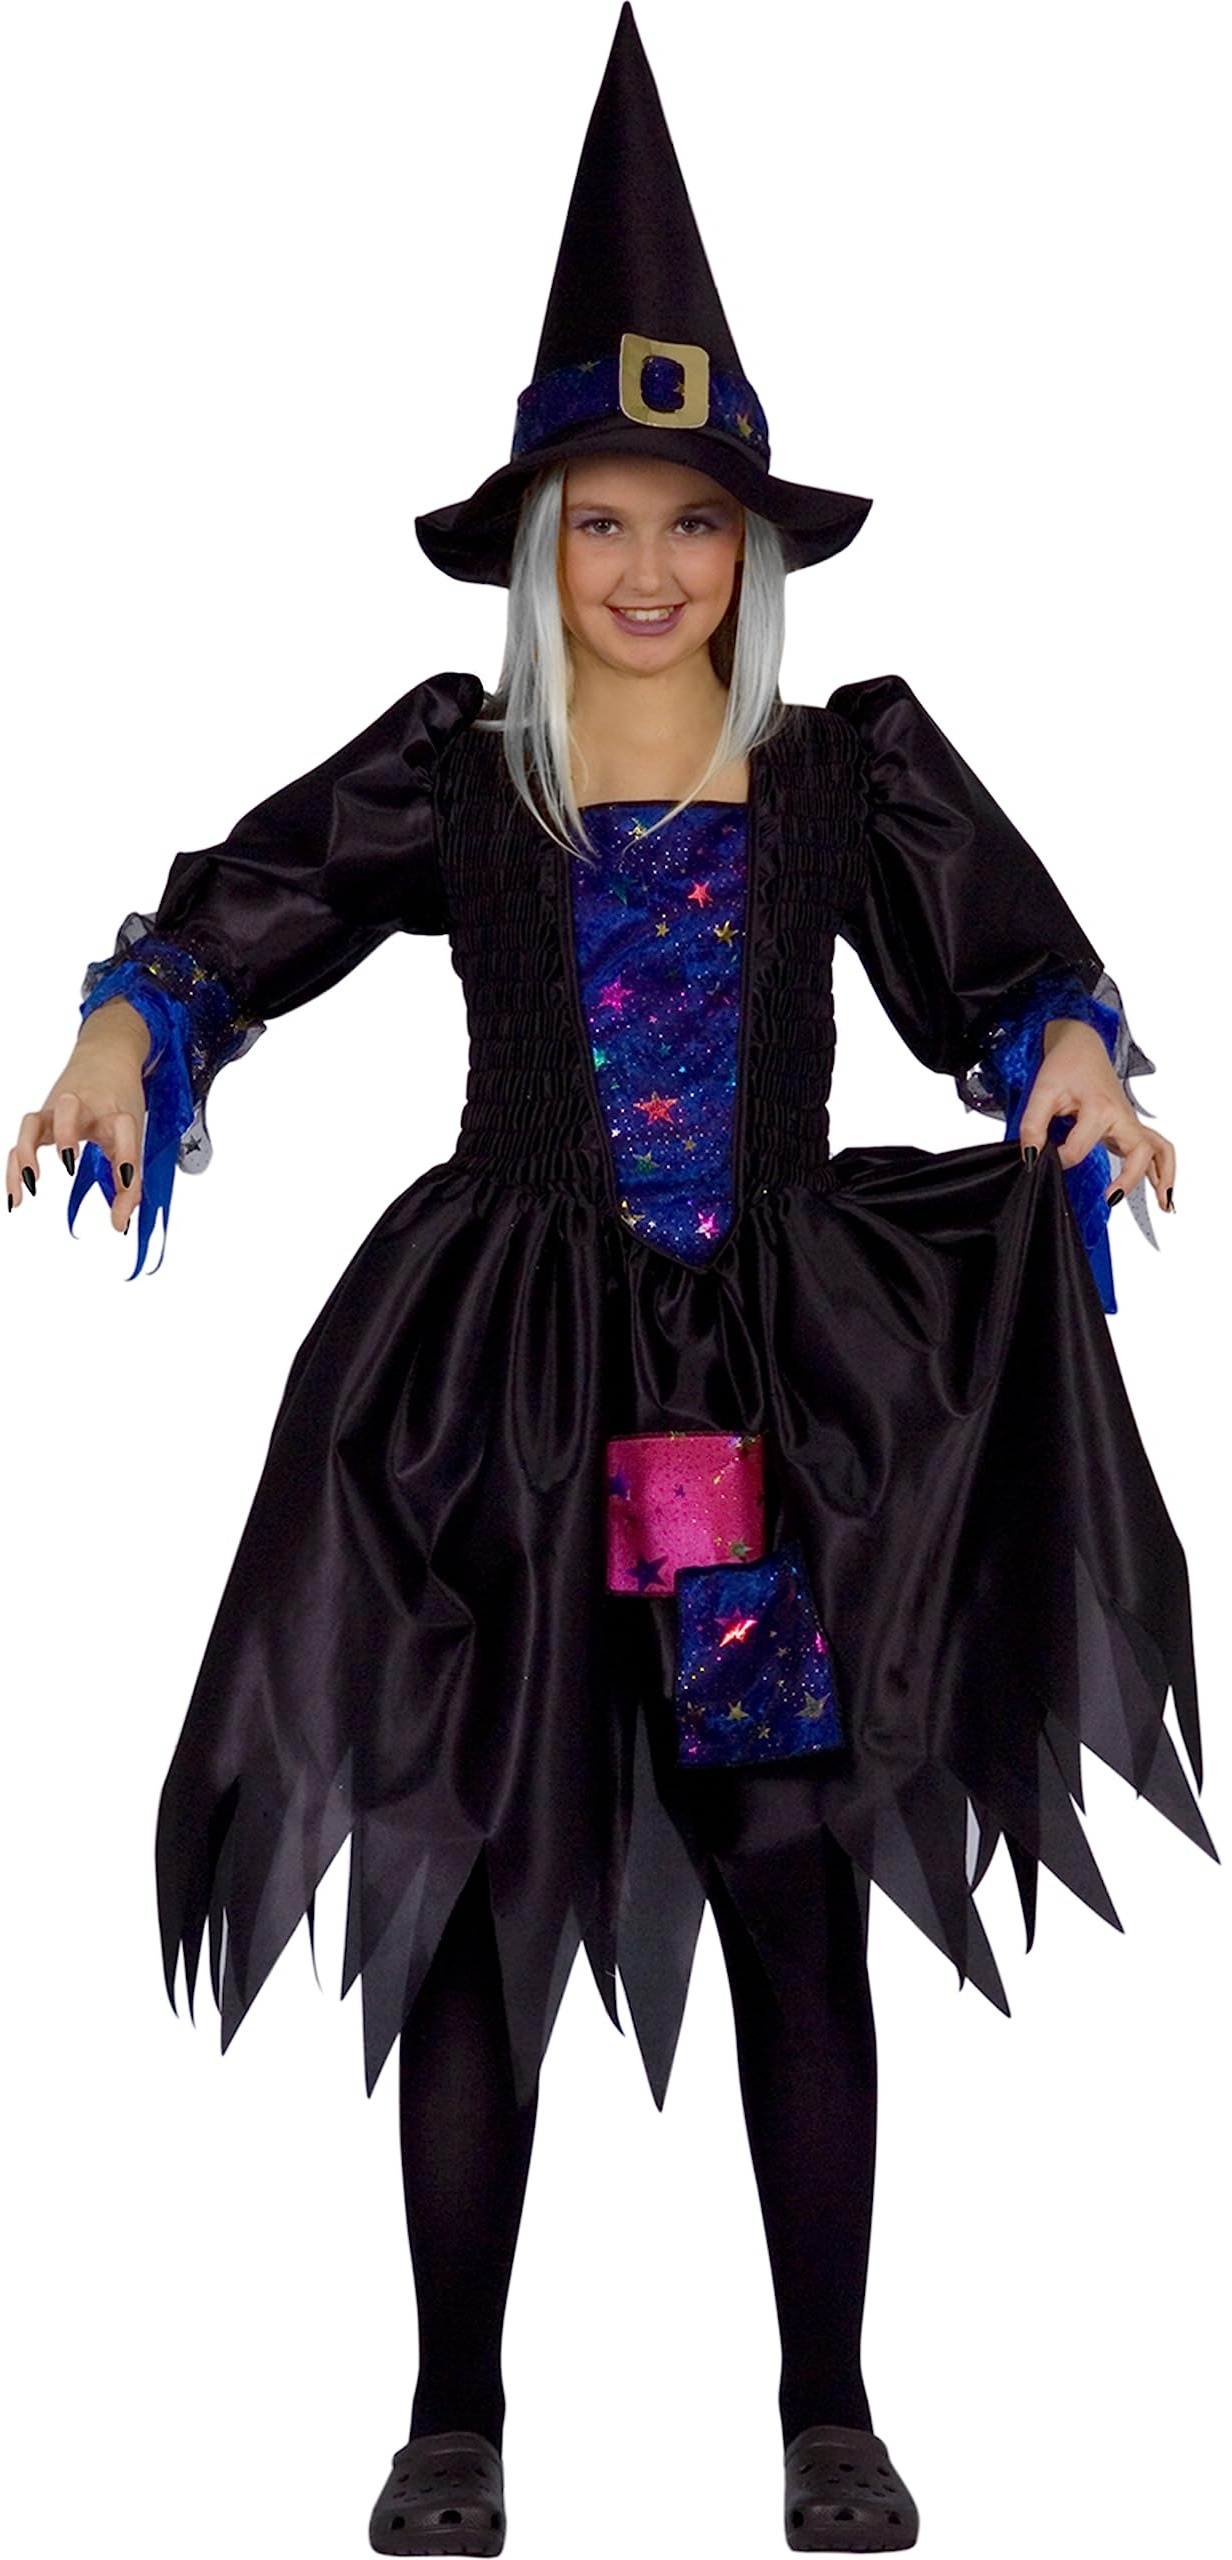 Ciao- Witch of the Night costume disguise girl (Size 4-6 years)